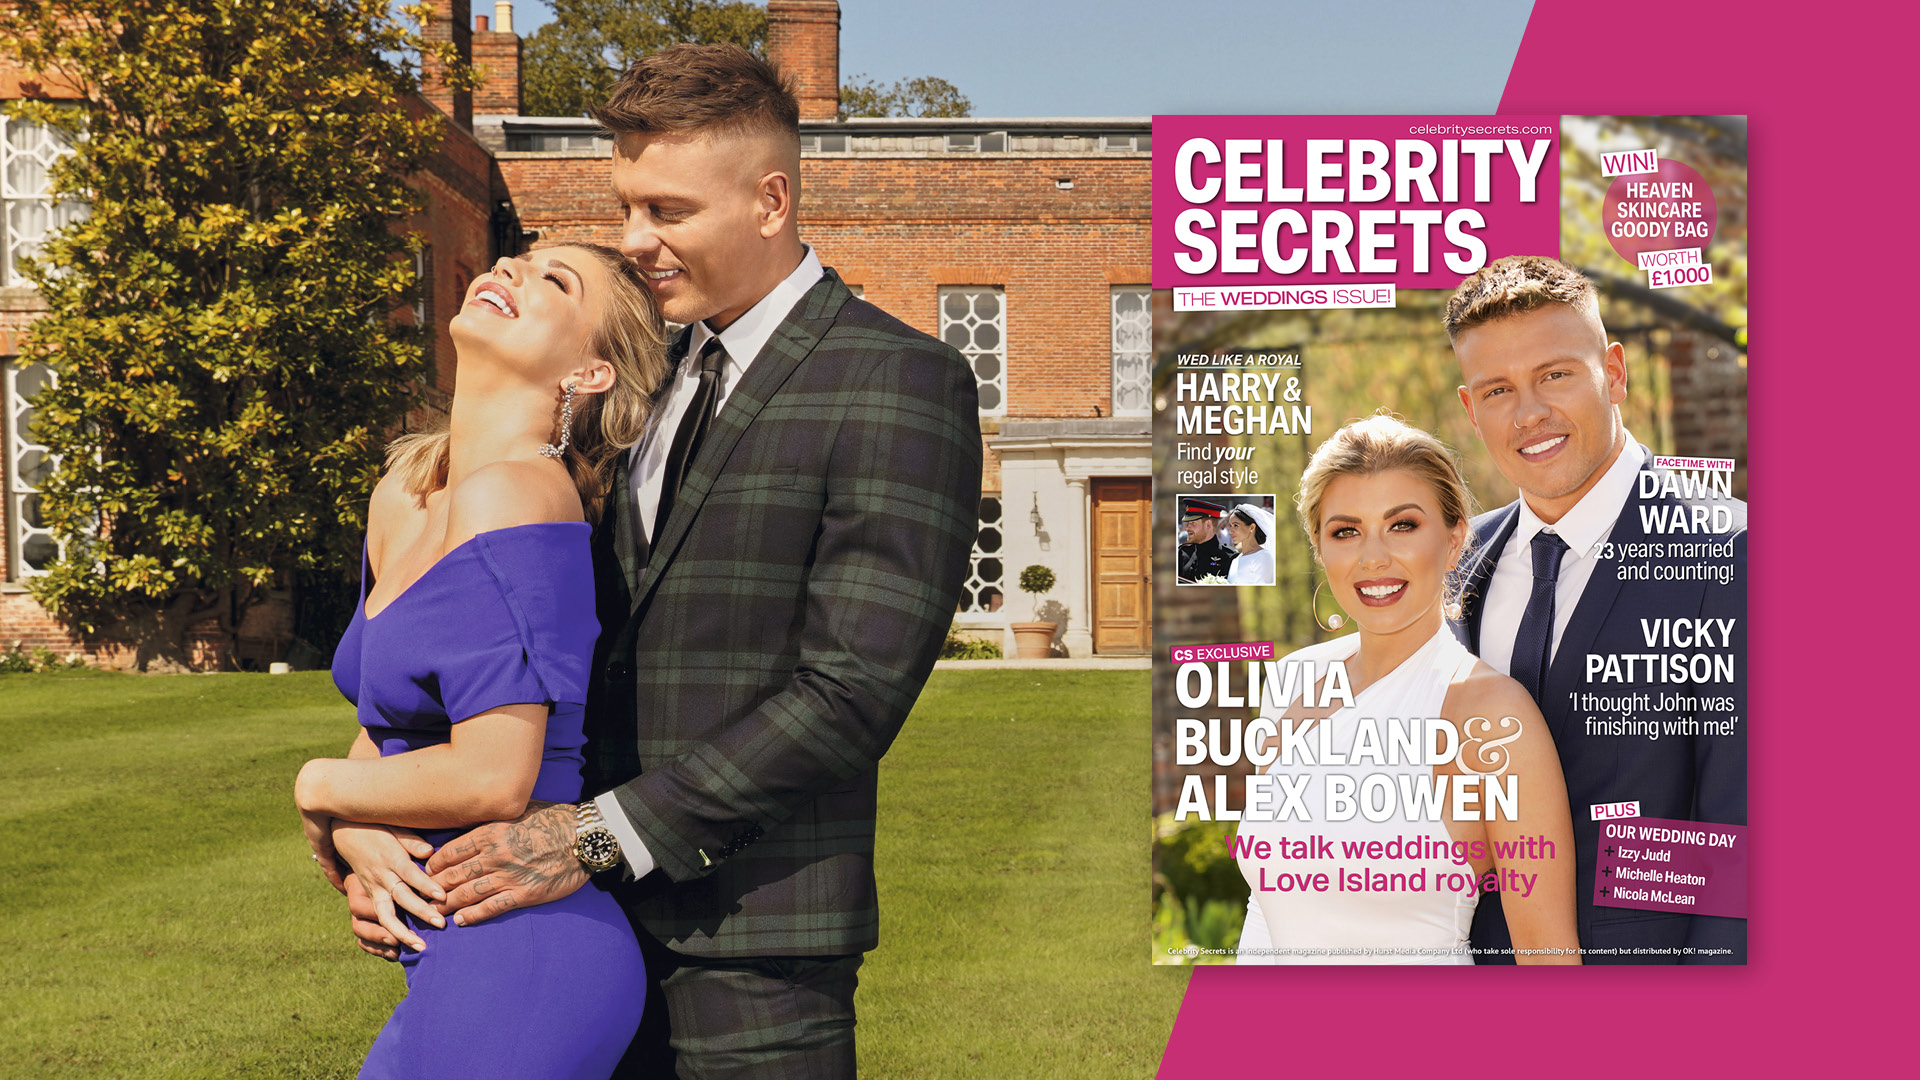 Exclusive interview with Love Island’s Alex Bowen and Olivia Buckland inside Celebrity Secrets Weddings issue – OUT NOW!